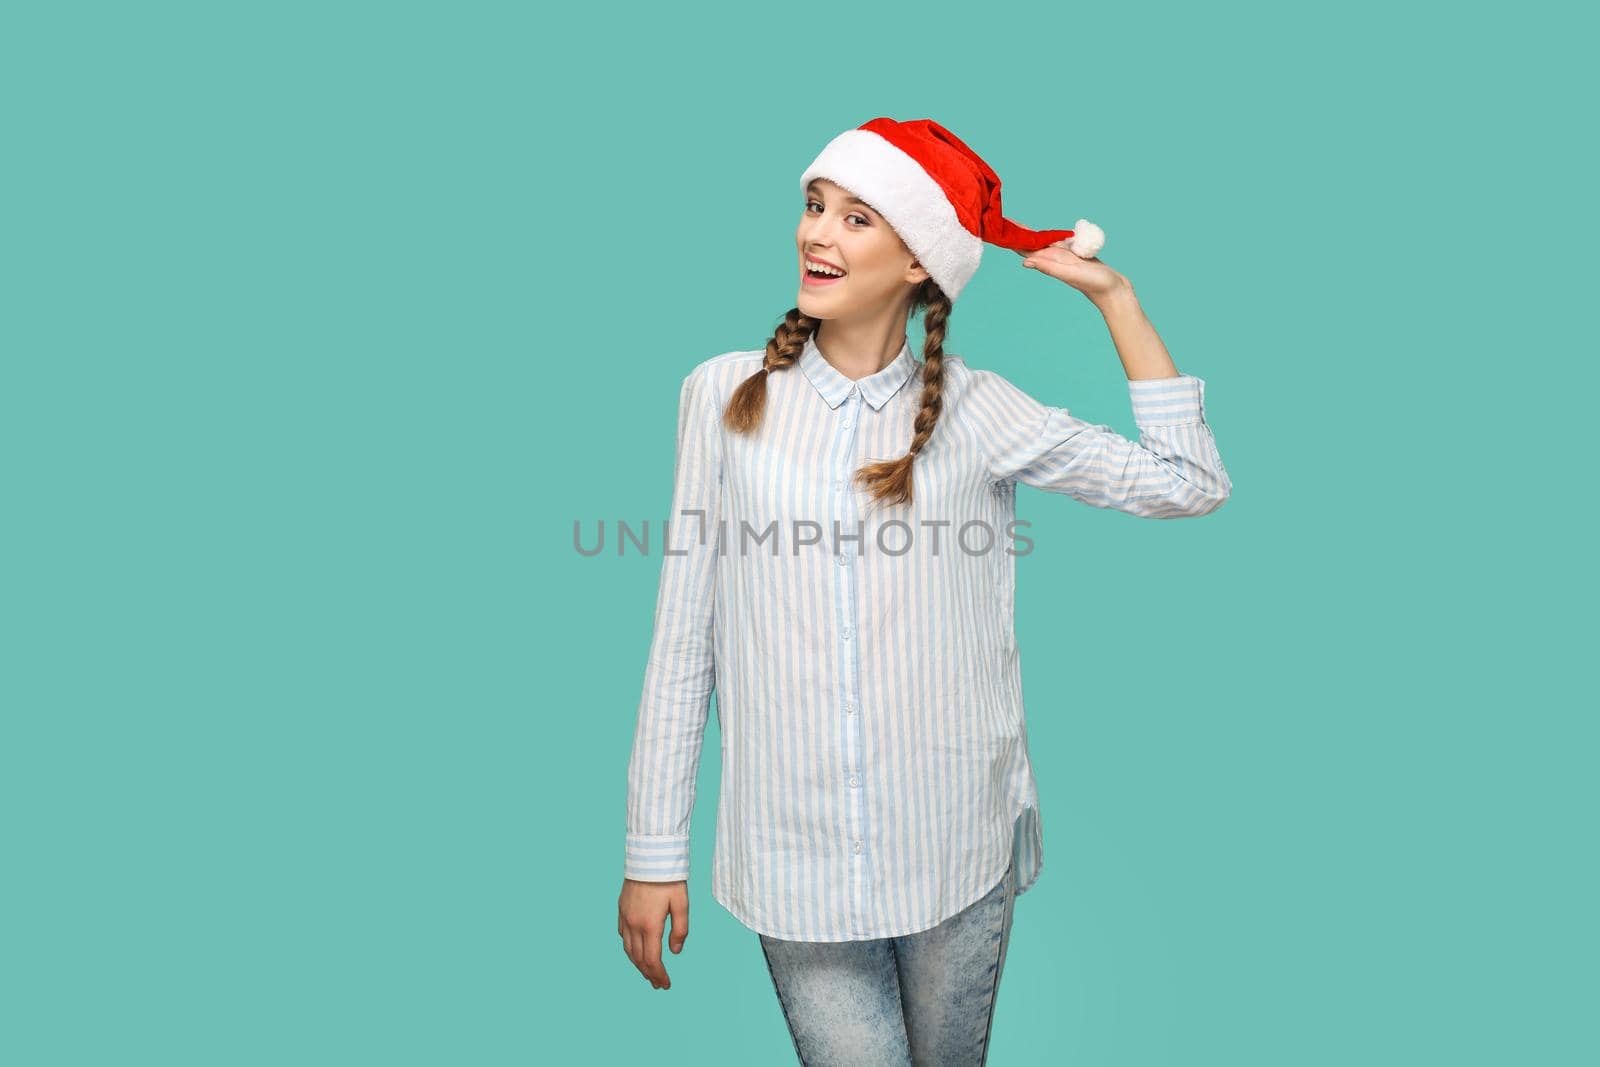 New year concept. happy funny beautiful girl in striped light blue shirt standing and holding red christmas hat, and looking at camera with toothy smile. indoor isolated on green background.